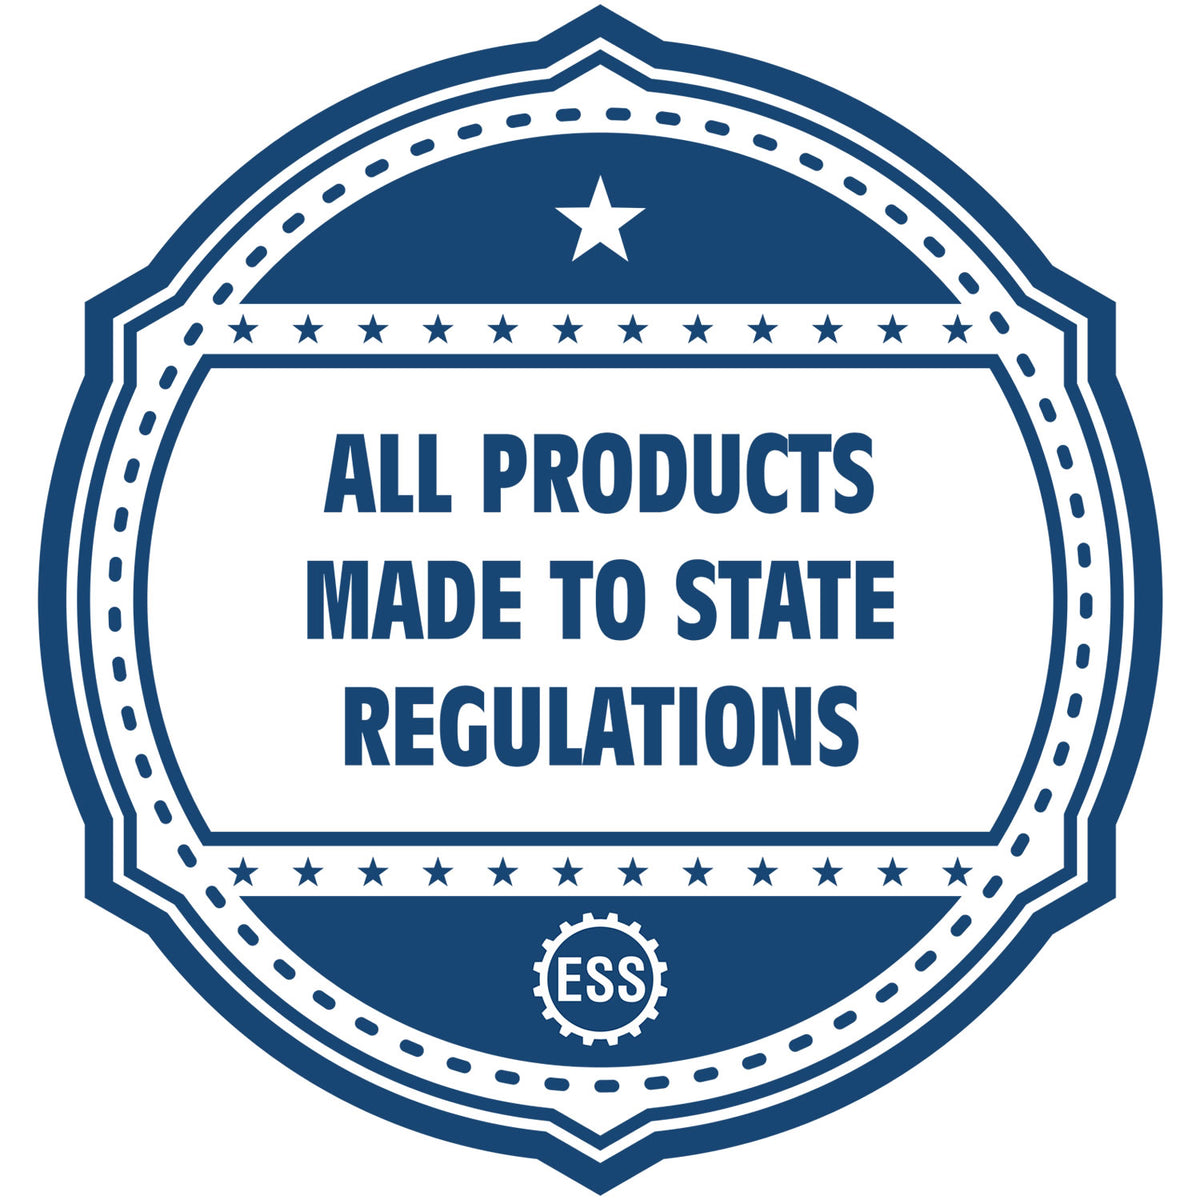 An icon or badge element for the Soft Pocket Wyoming Landscape Architect Embosser showing that this product is made in compliance with state regulations.